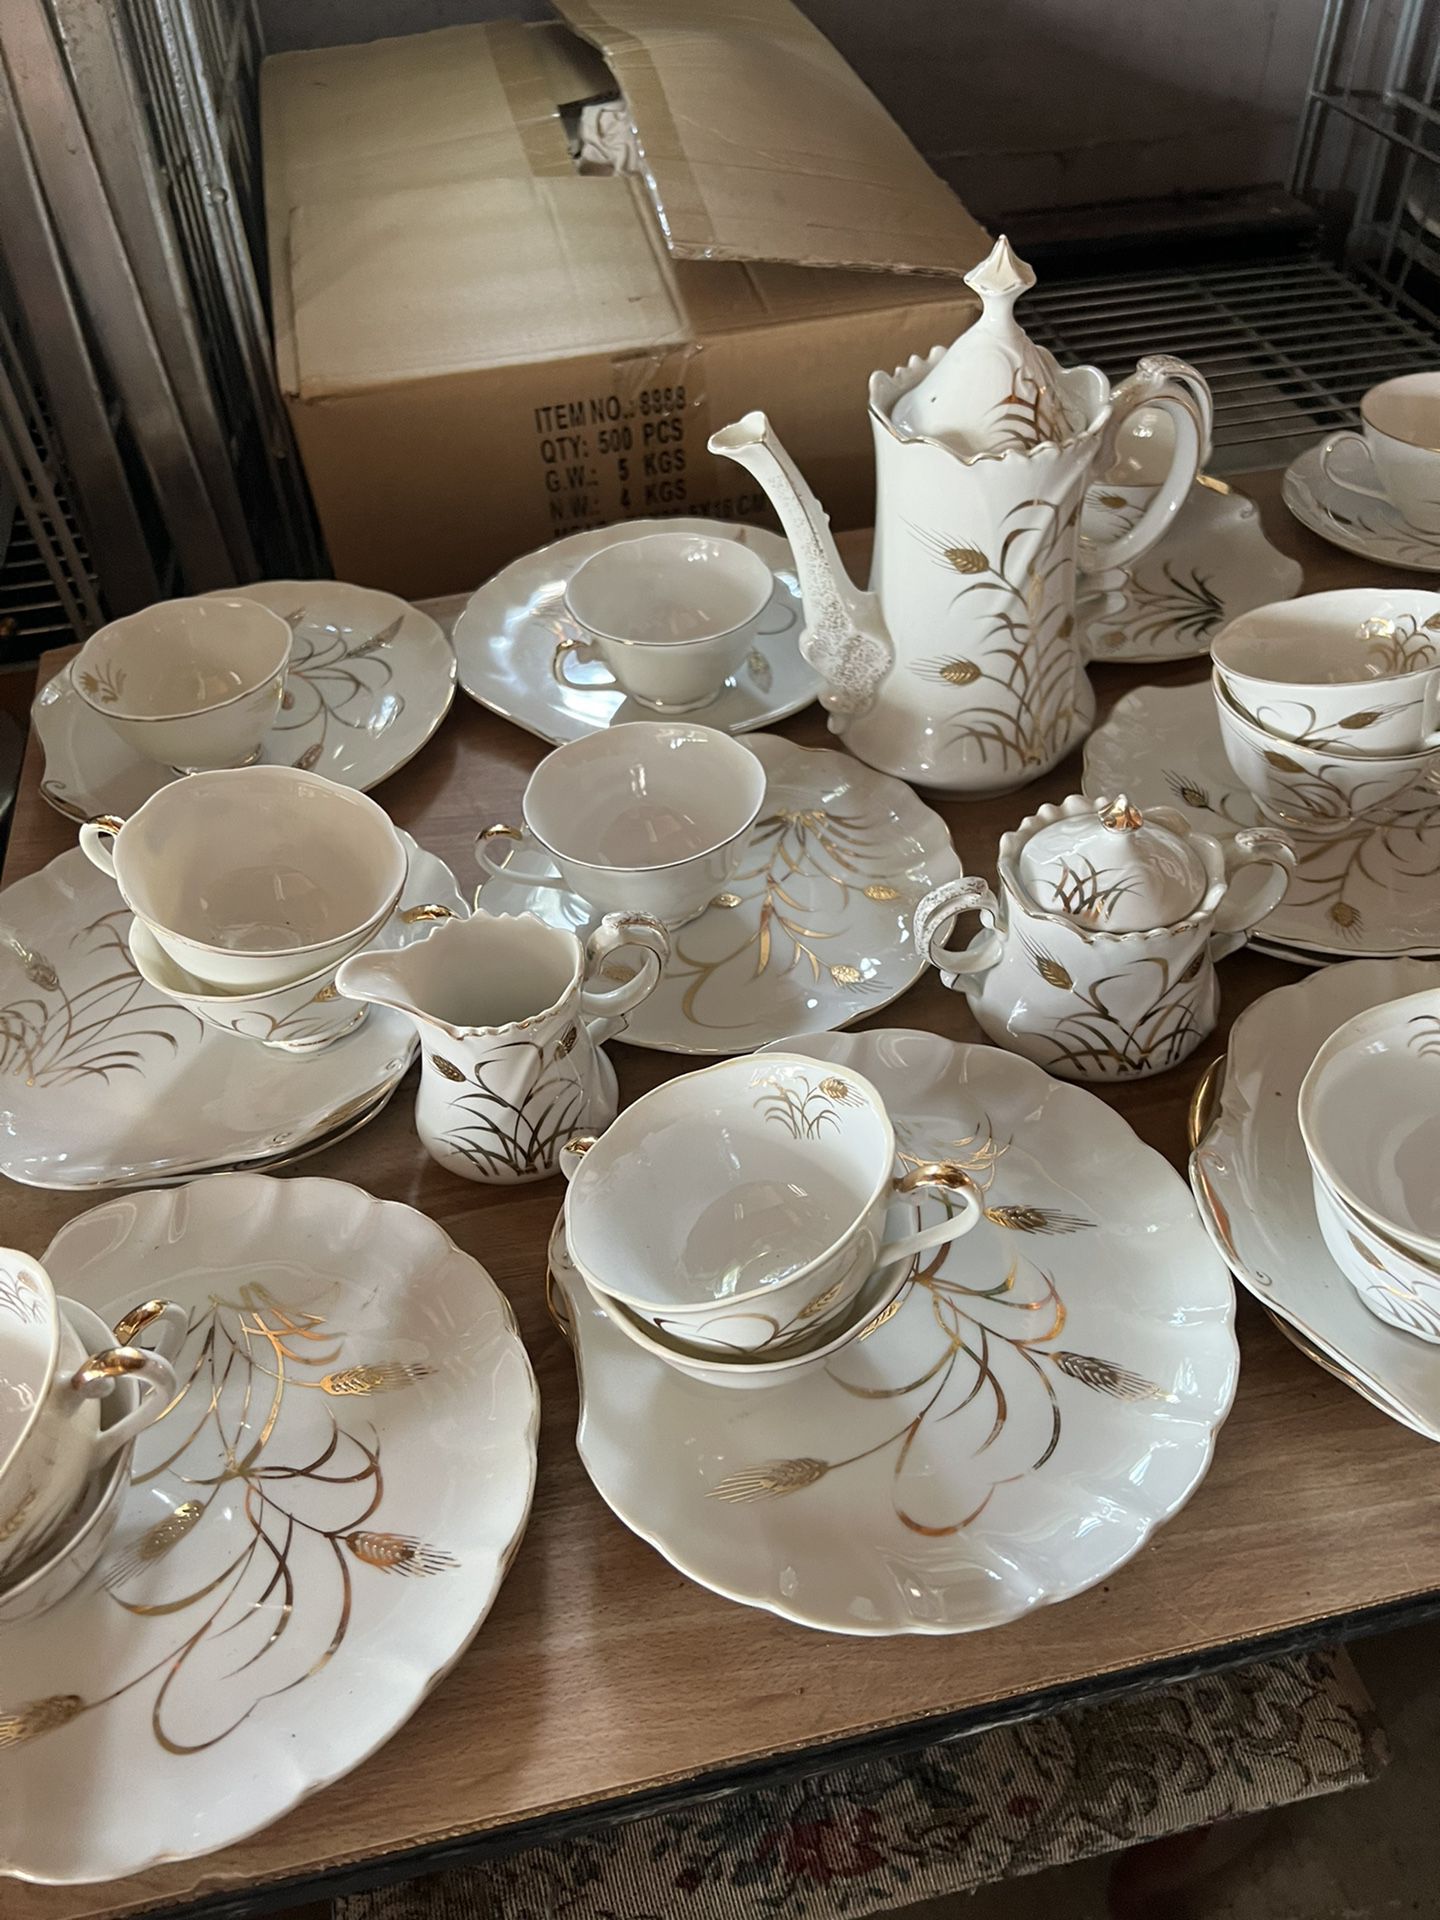 Lefton China Tea Dessert Set For14 People With Tea Kettle , Creamer And Suger.